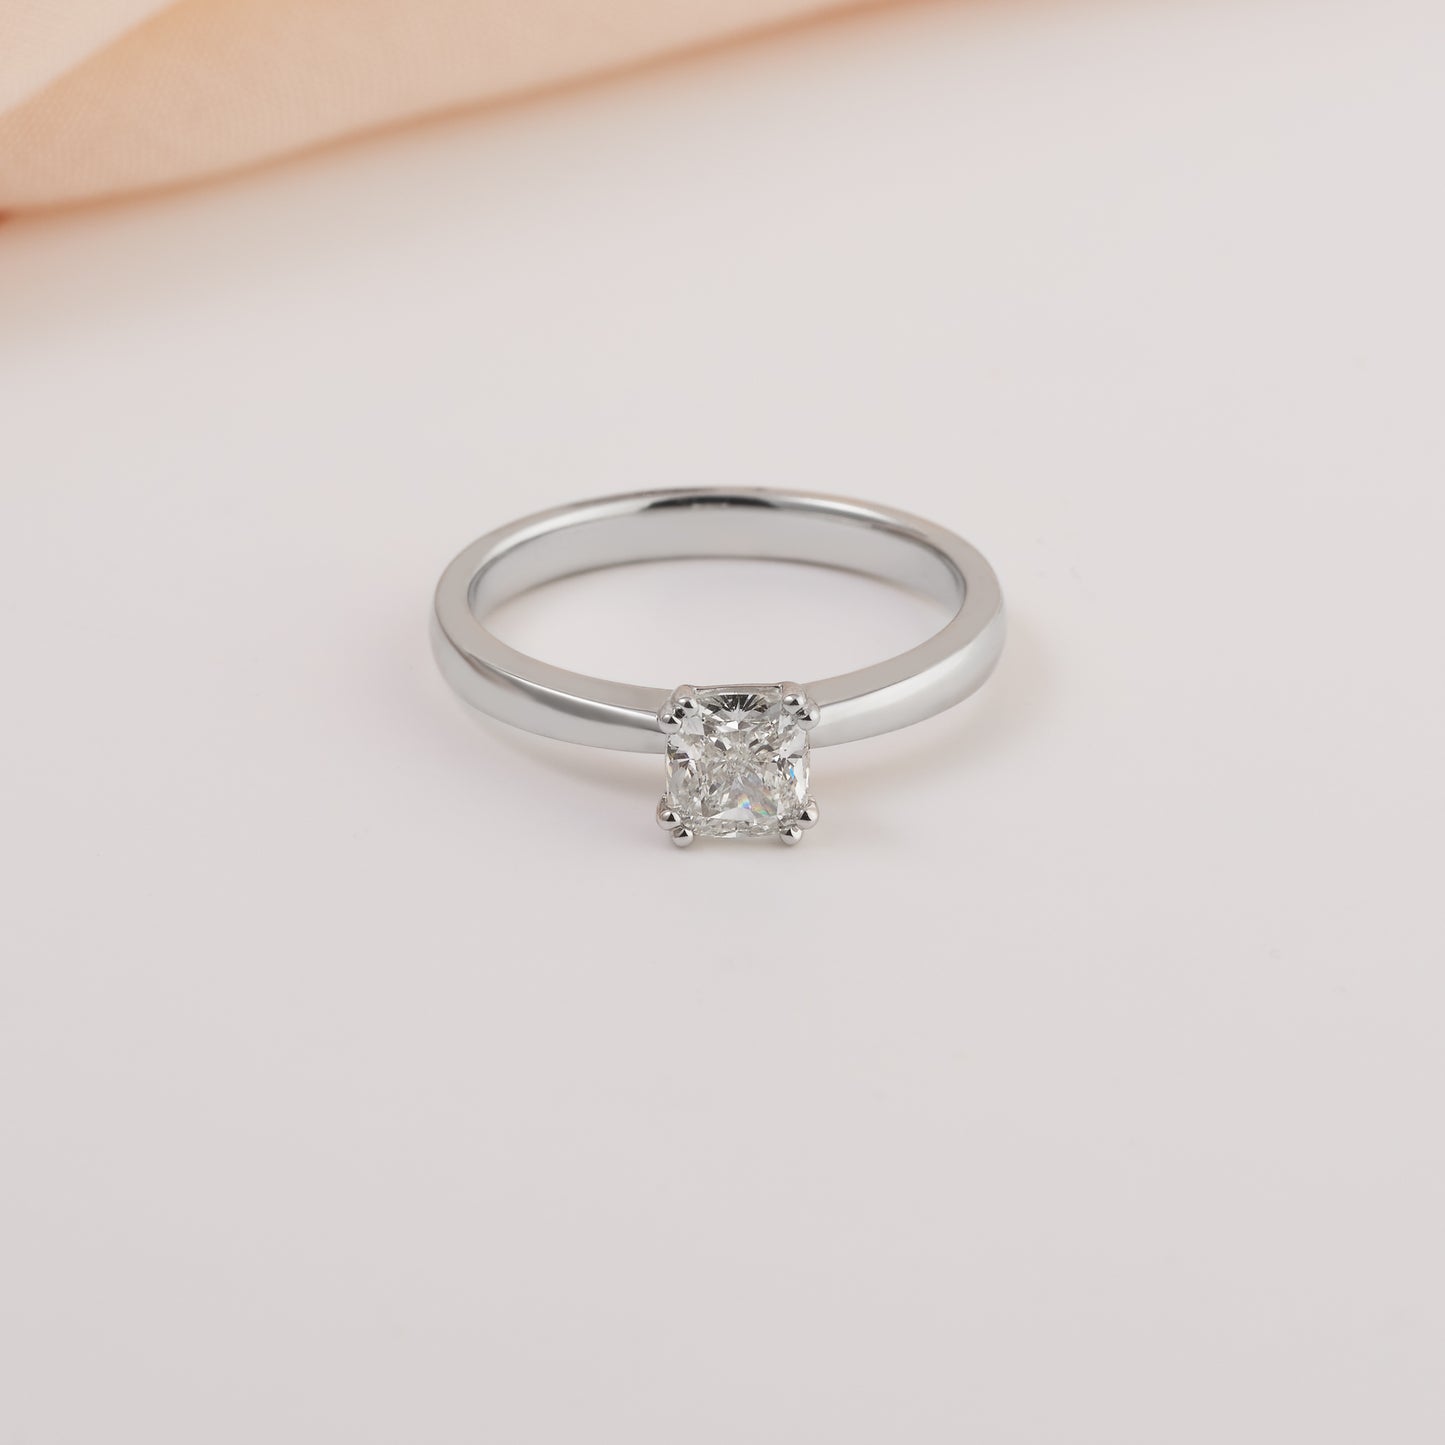 18K White Gold Square Cushion Diamond Solitaire Engagement Ring 0.8ct